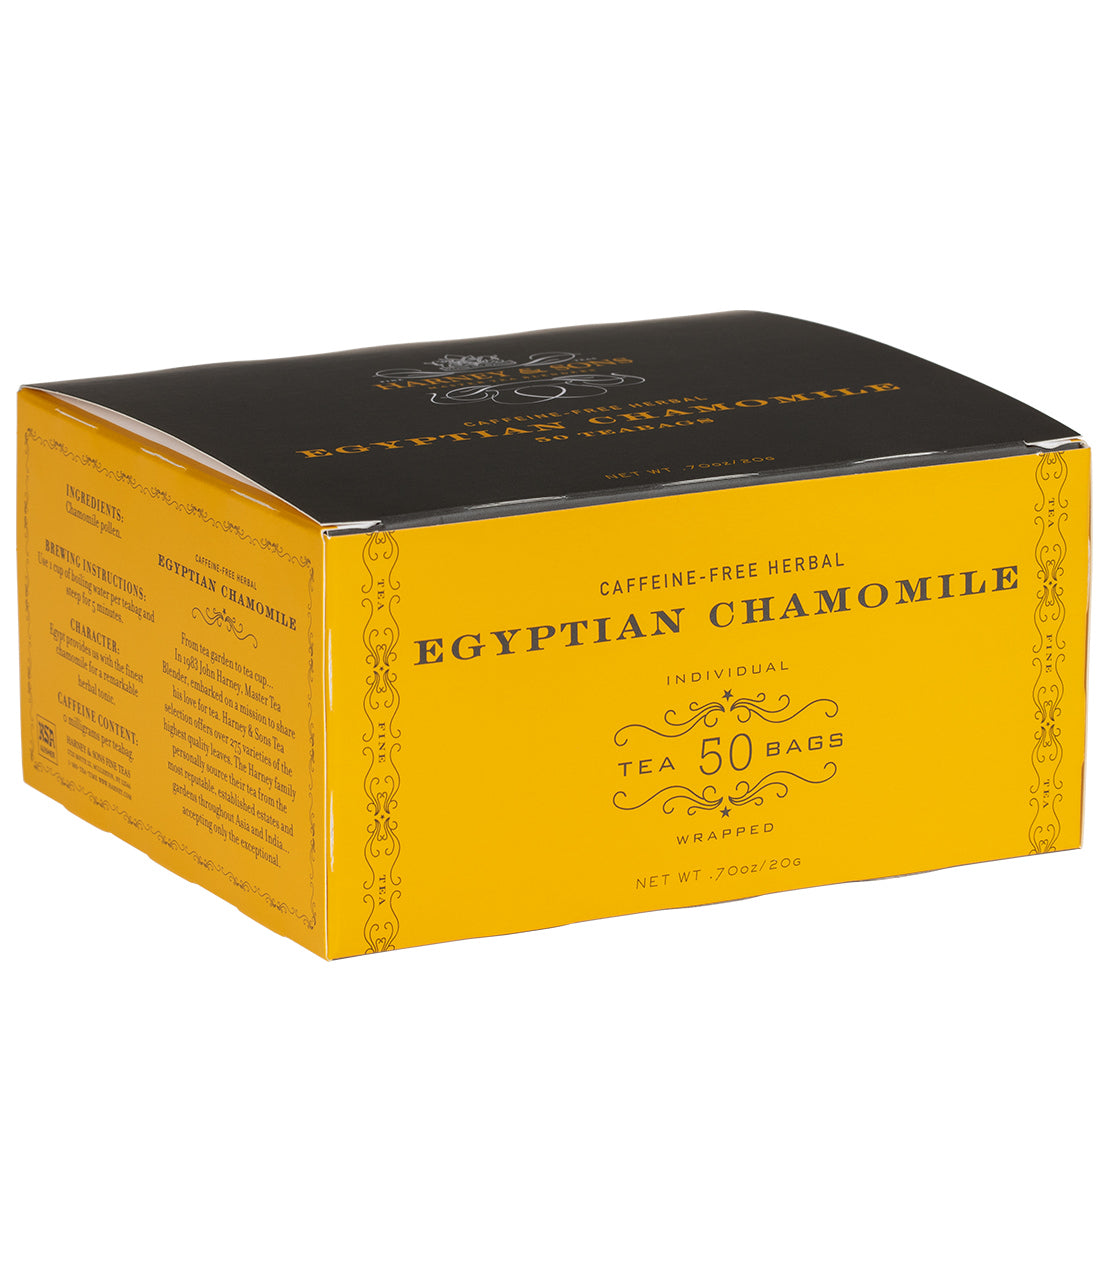 Chamomile - Teabags 50 CT Foil Wrapped Teabags - Harney & Sons Fine Teas